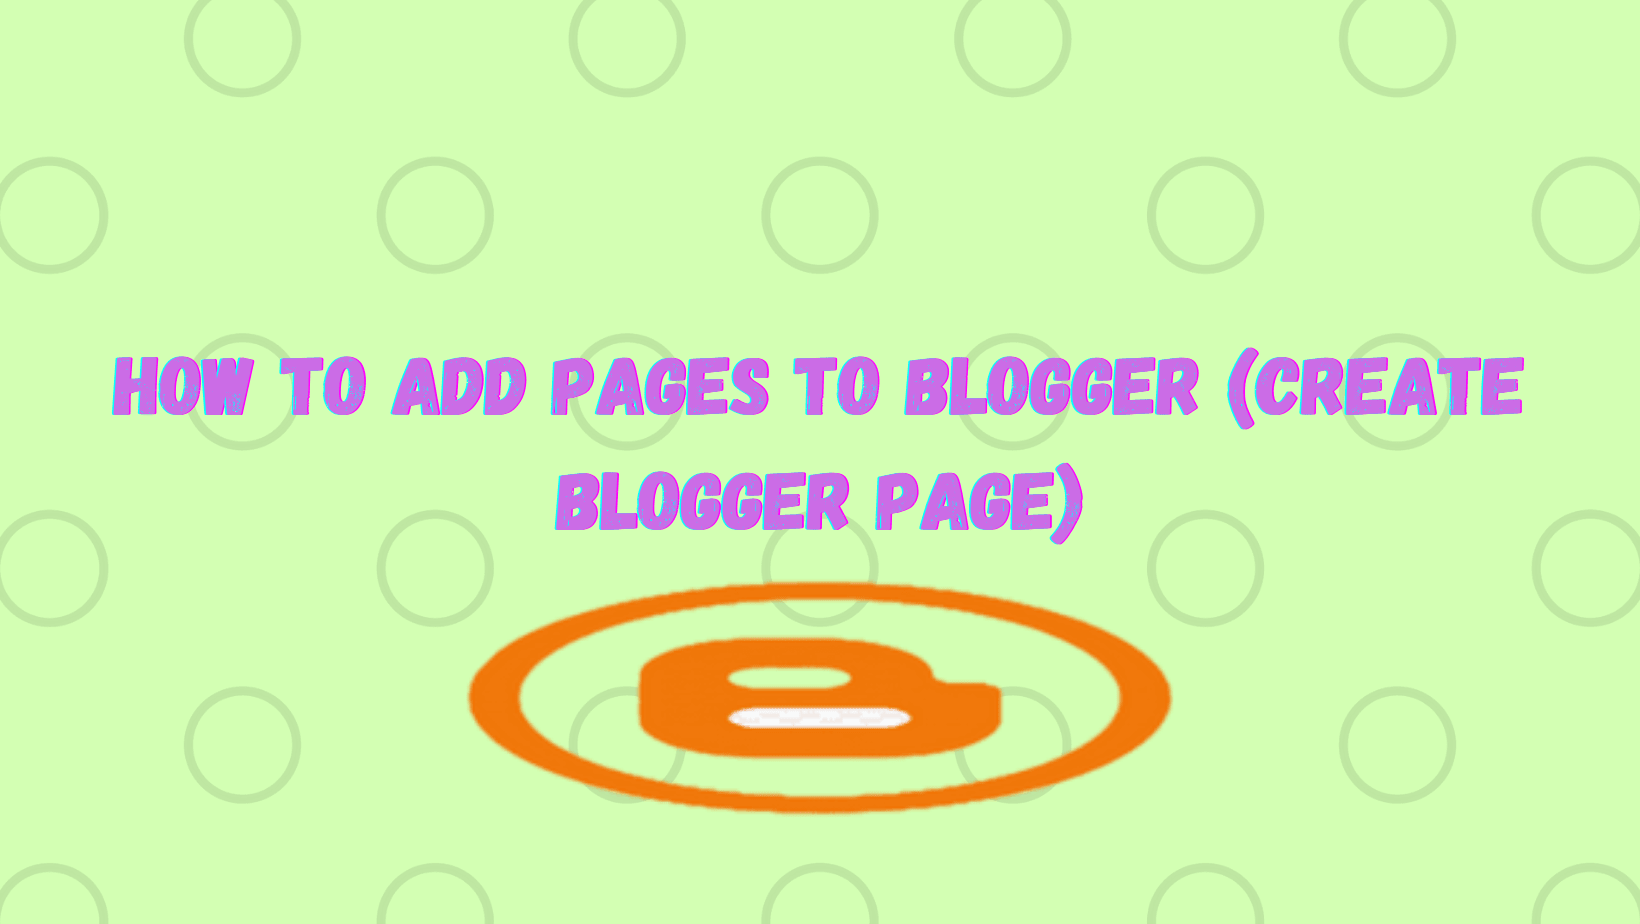 How To Add Pages To Blogger (Create Blogger Page)